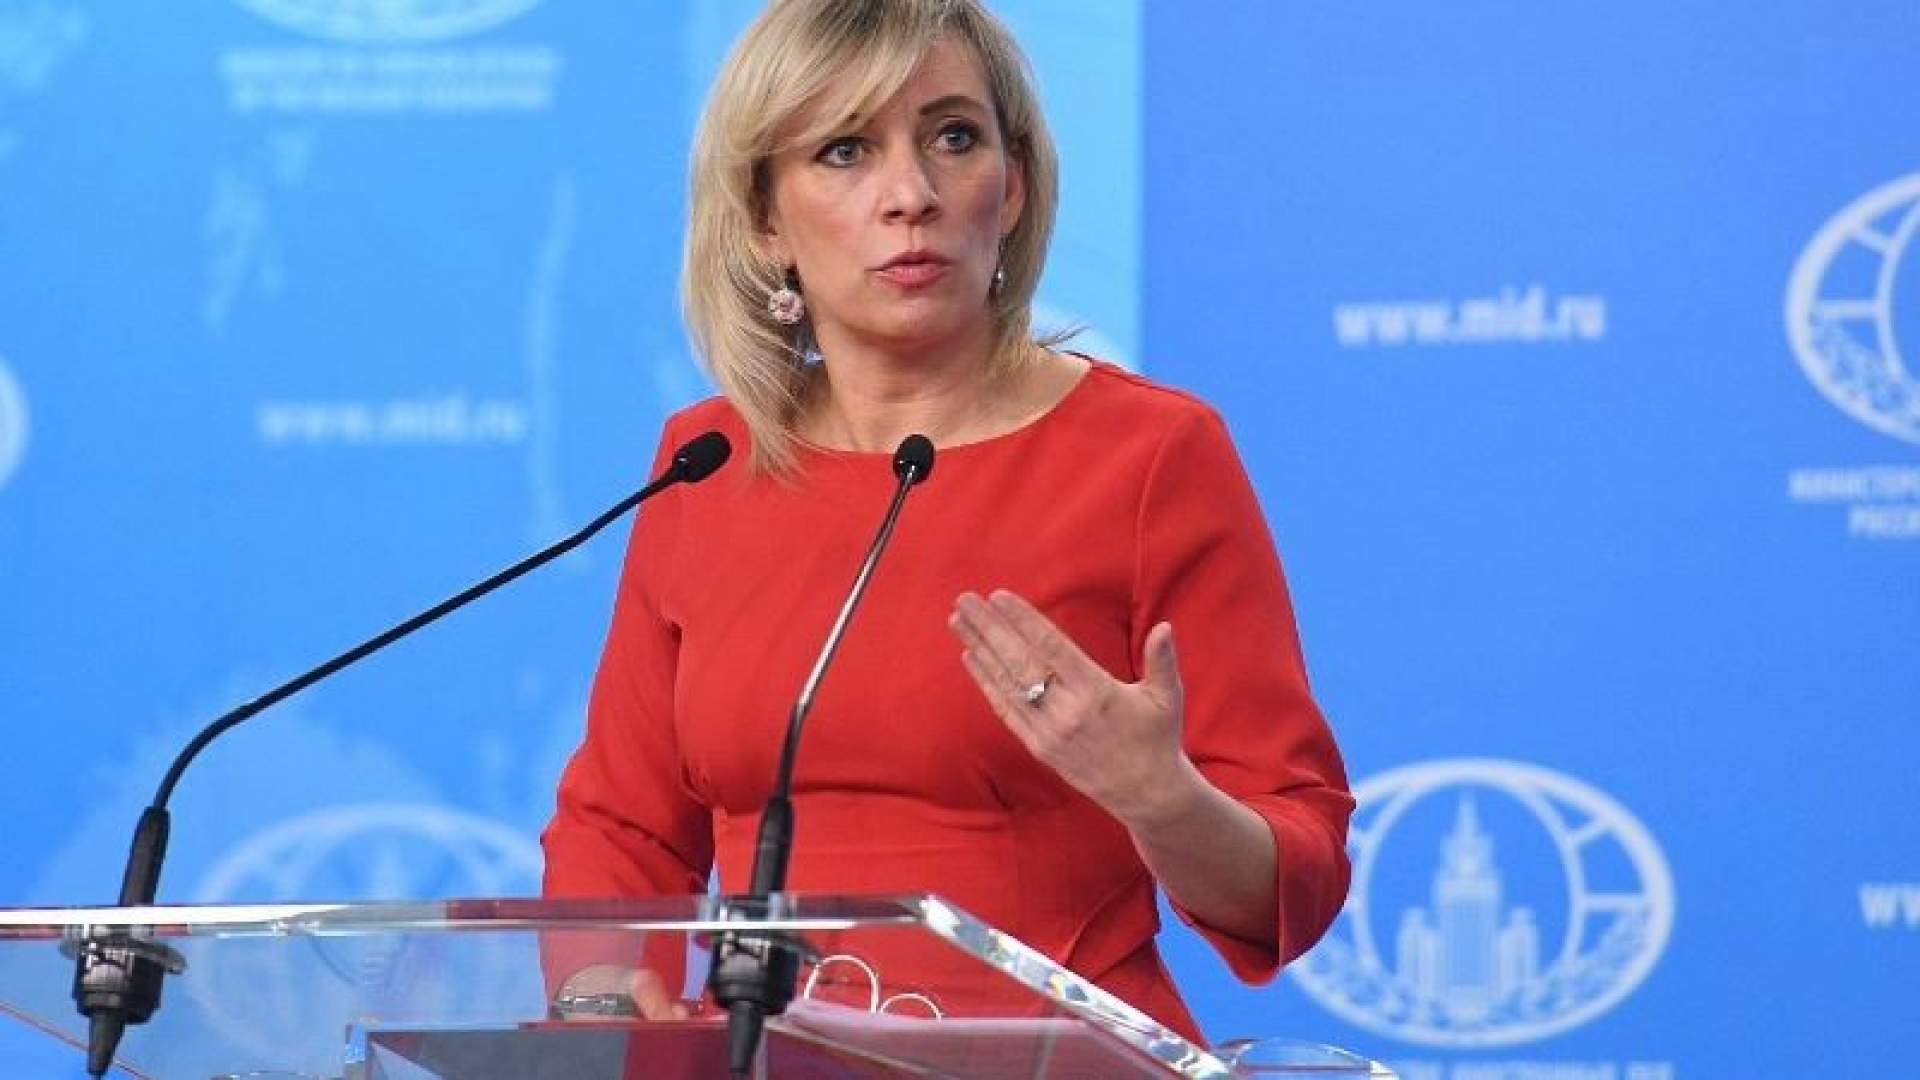 "There is a territory, there is a people, there is no state" - Maria Zakharova on the European integration of Ukraine